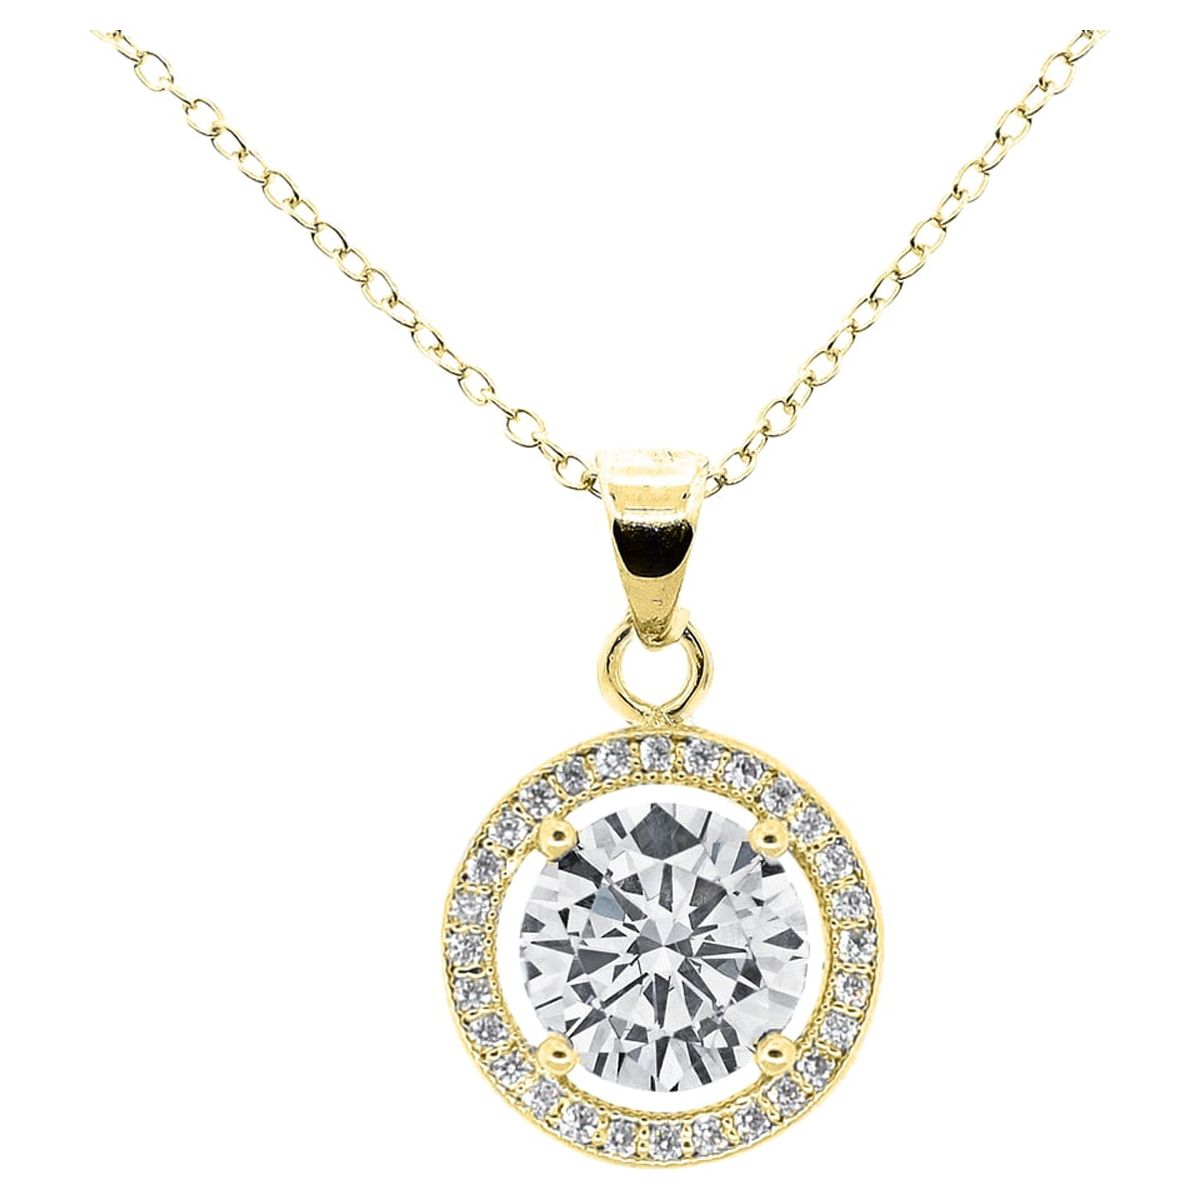 Cate & Chloe Blake 18k Yellow Gold Plated Halo Necklace for Women | CZ Crystal Necklace, Jewelry Gift for Her - image 1 of 8